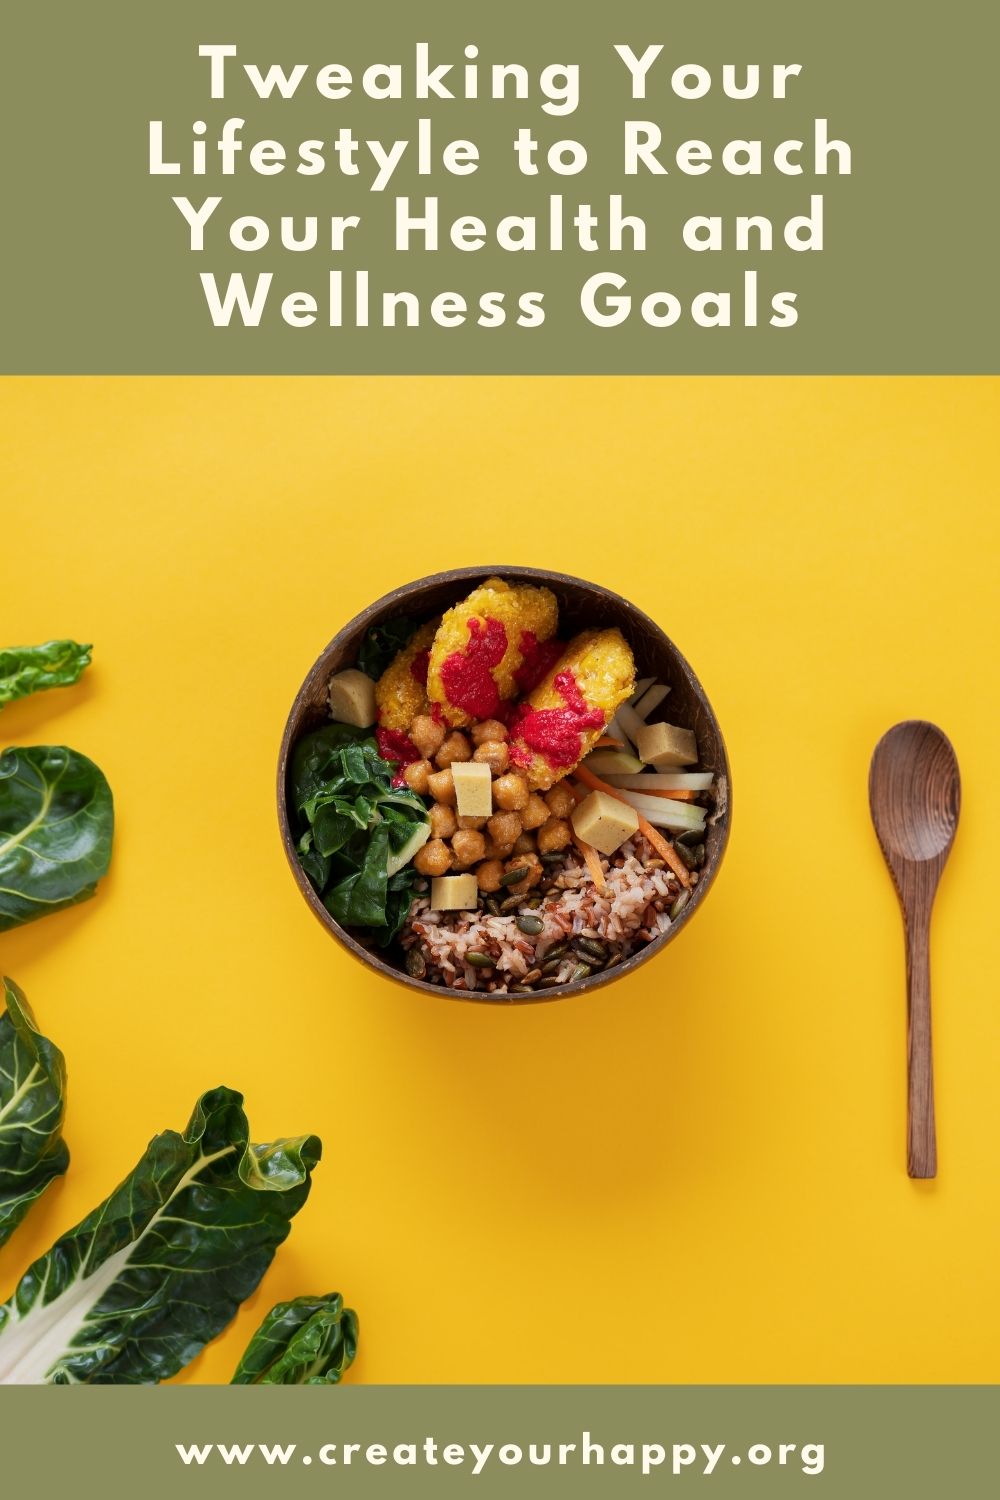 Tweaking Your Lifestyle to Reach Your Health and Wellness Goals